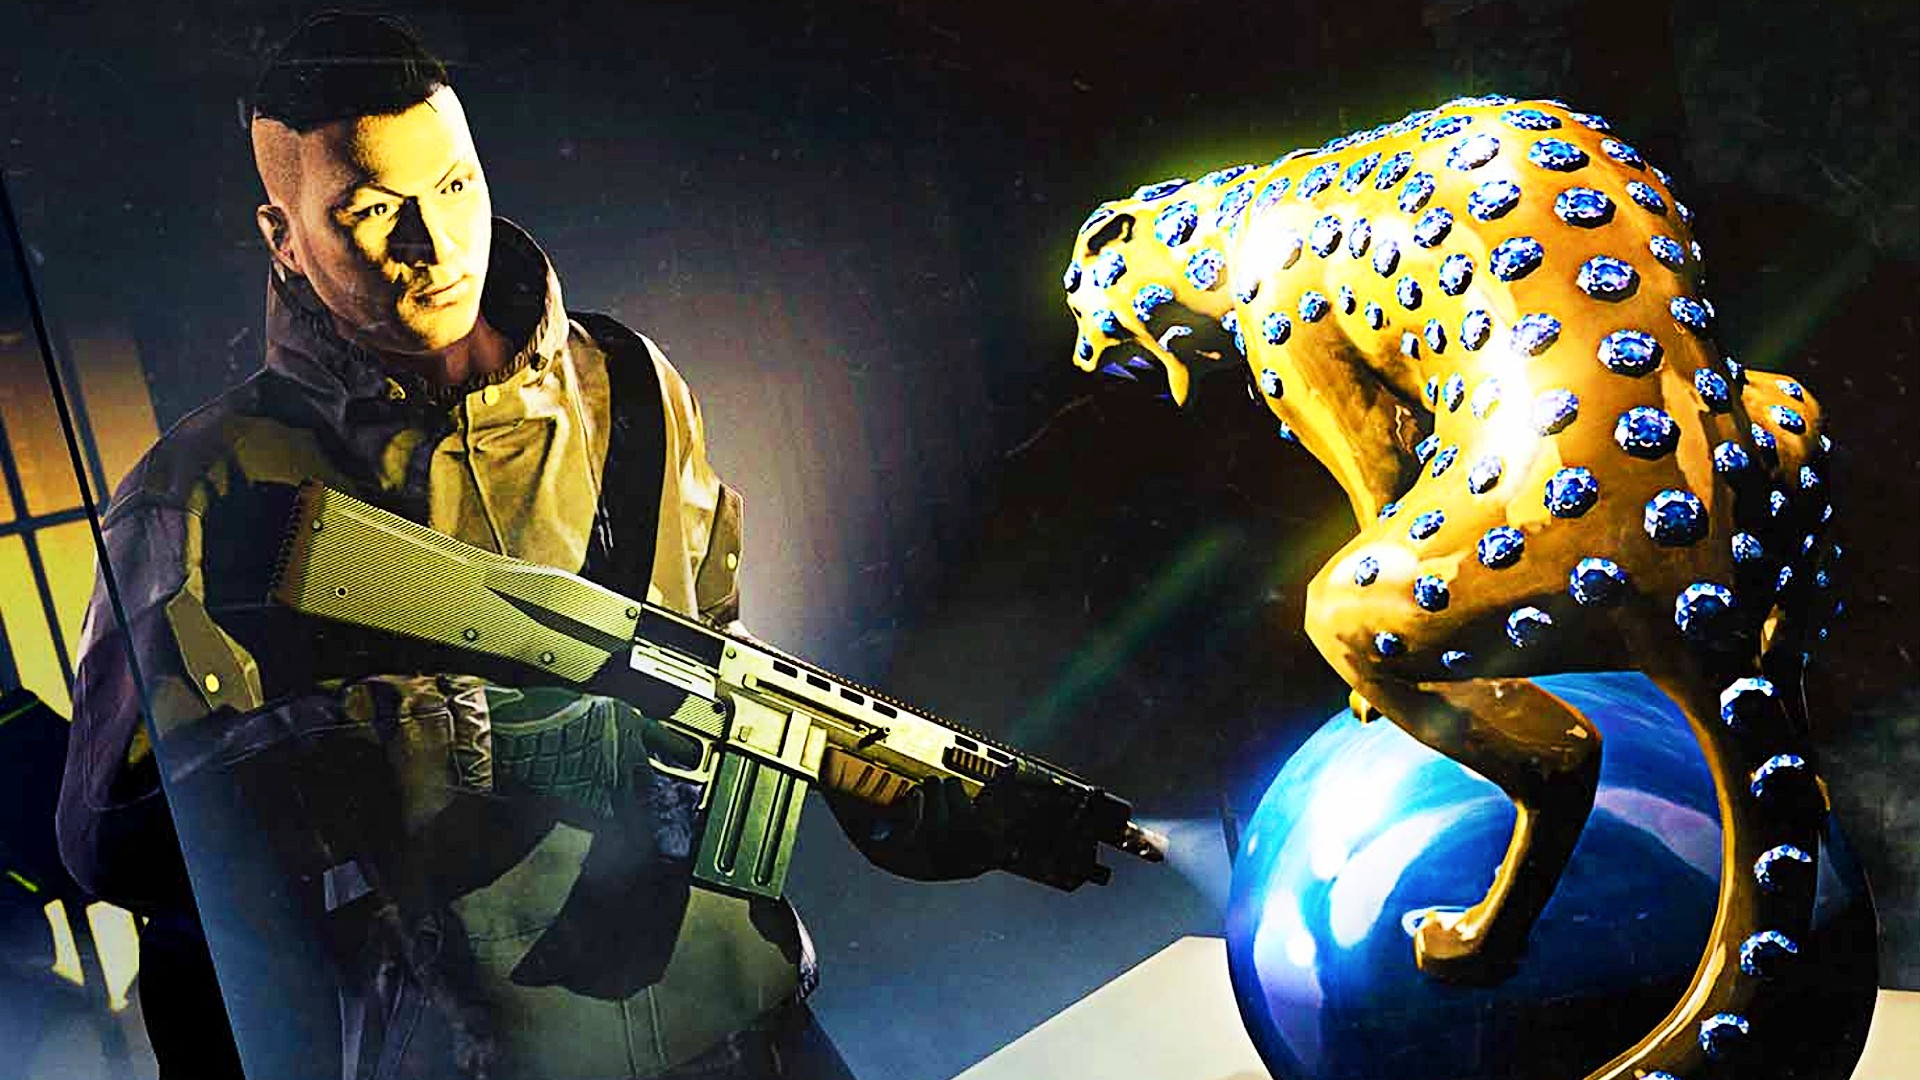 GTA Online’s weekly update reintroduces the Cayo Perico Heist’s panther statue